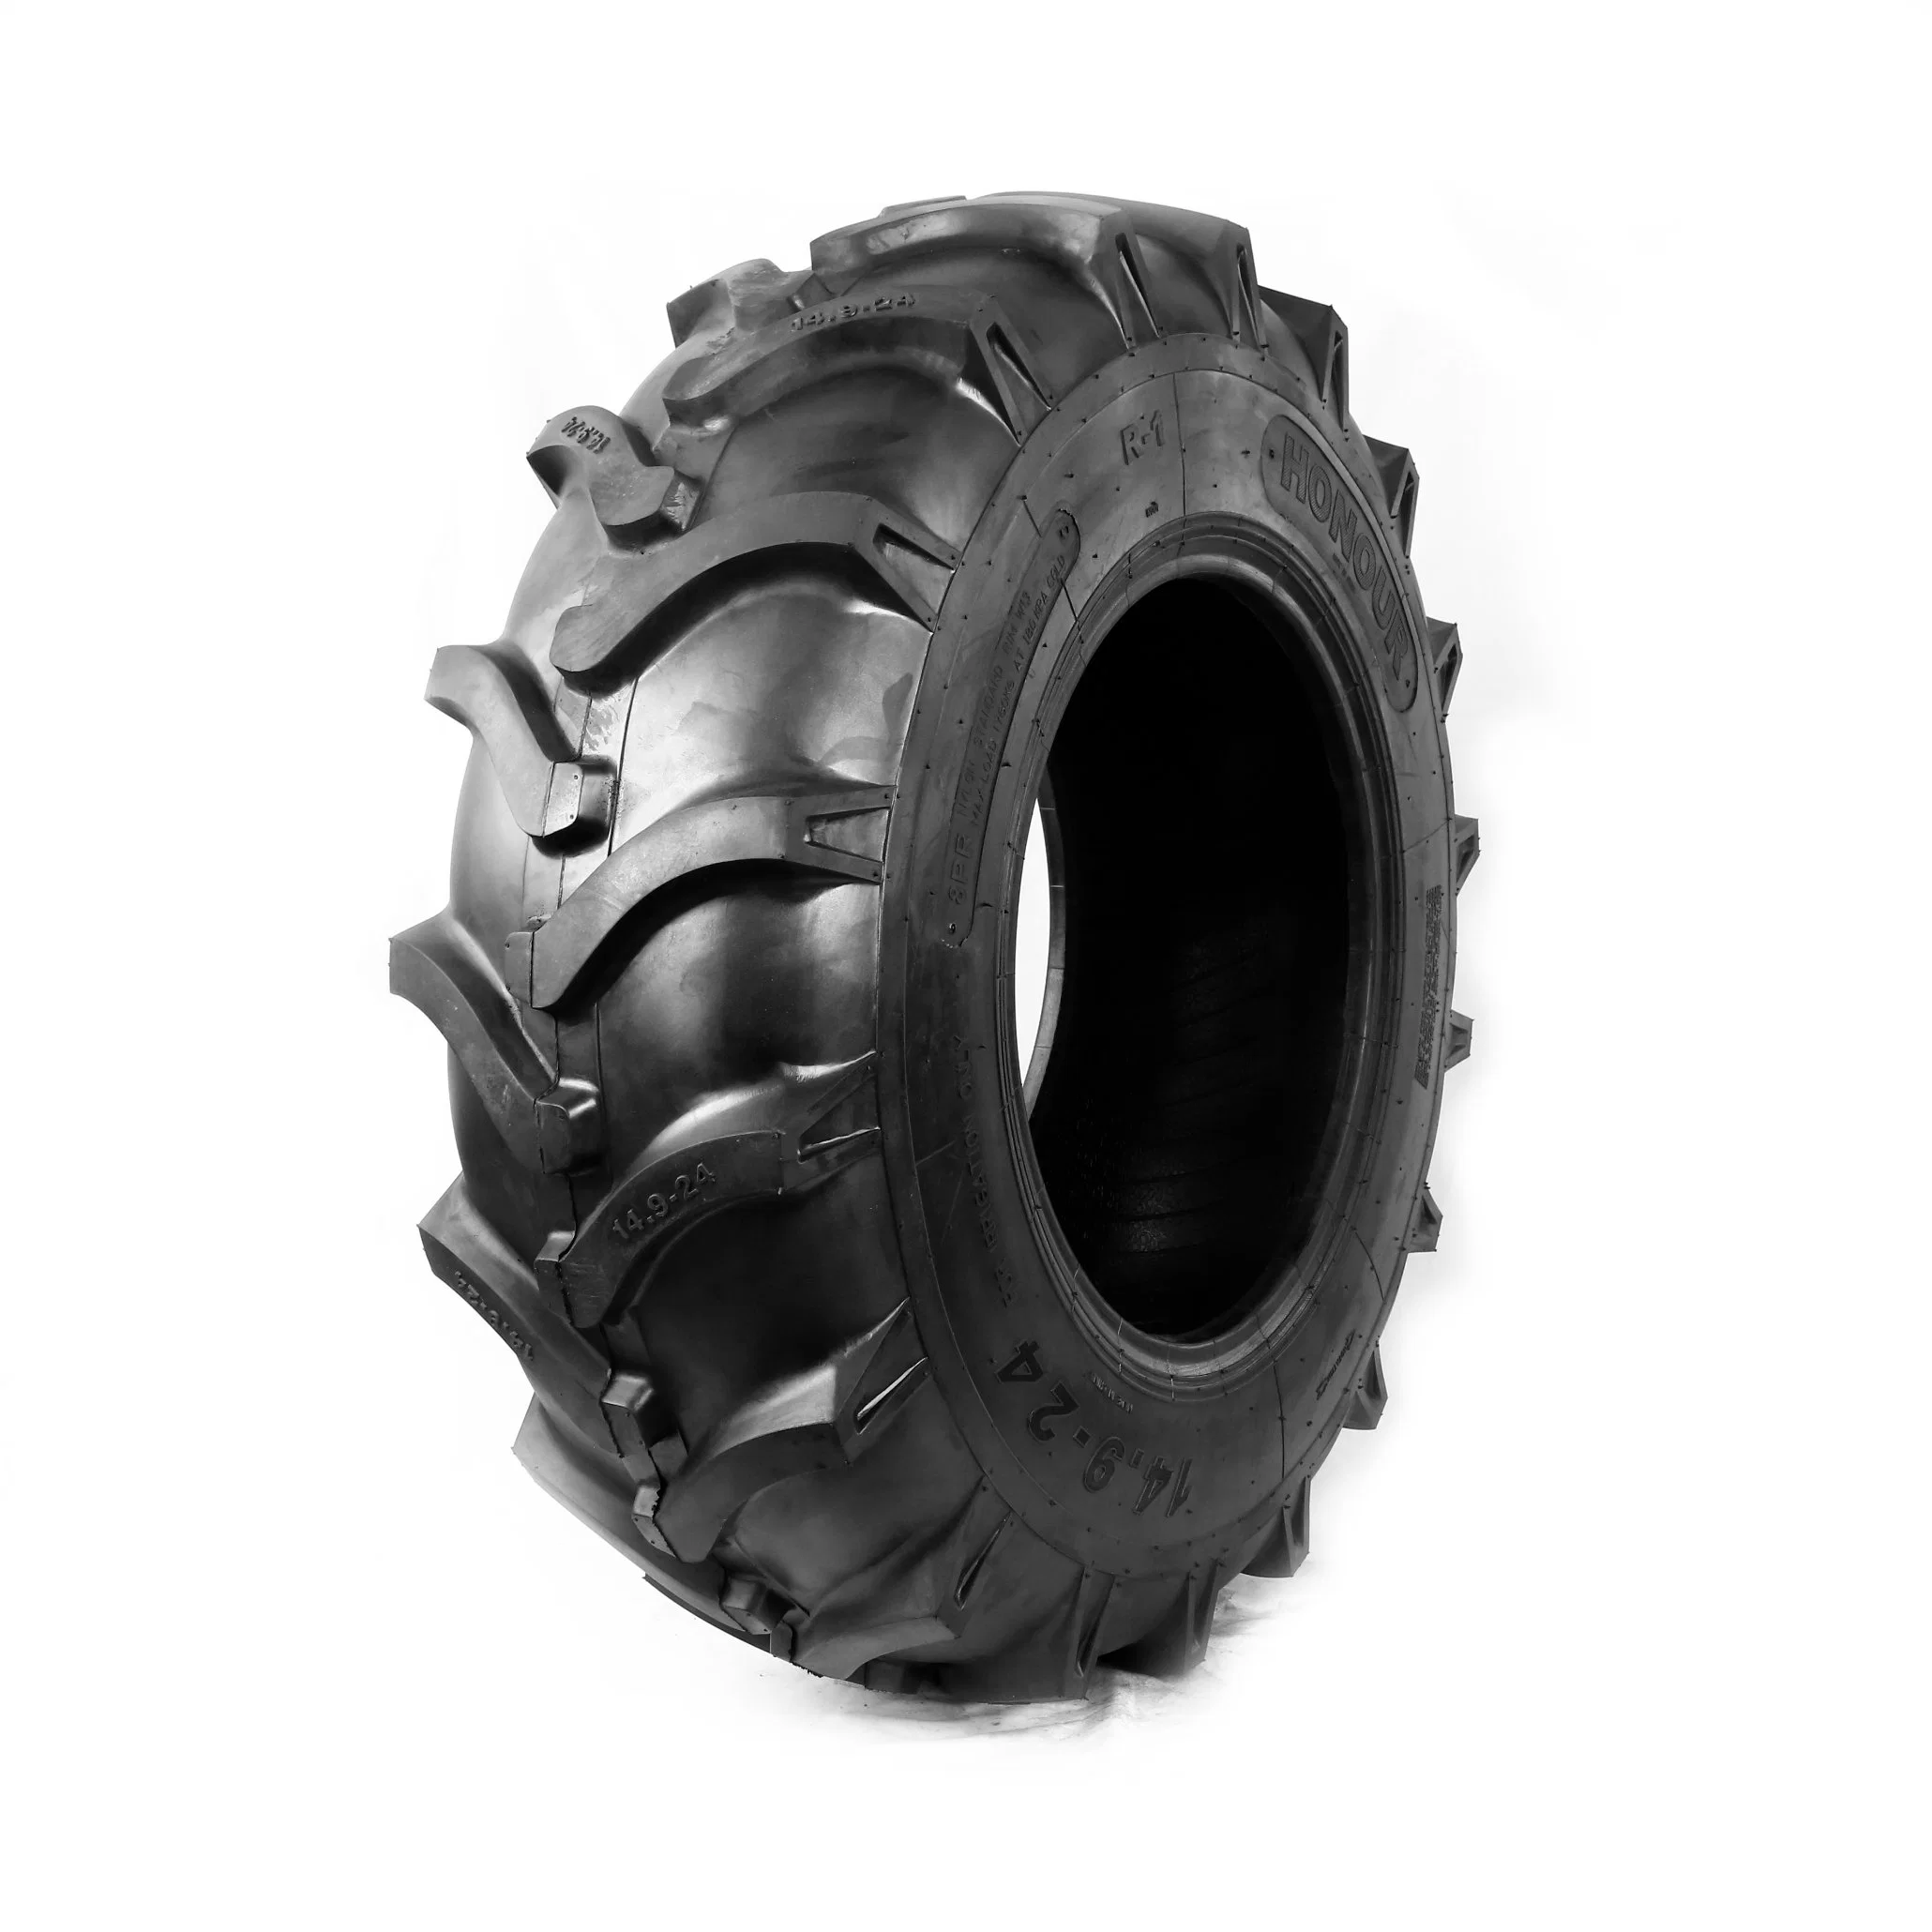 Agr Tractor Agricultural Nylon Radial Tube Farm Tractor Harvest Irrigation Bias Tire (14.9-24, 16.9-28, 15.5/80-24)